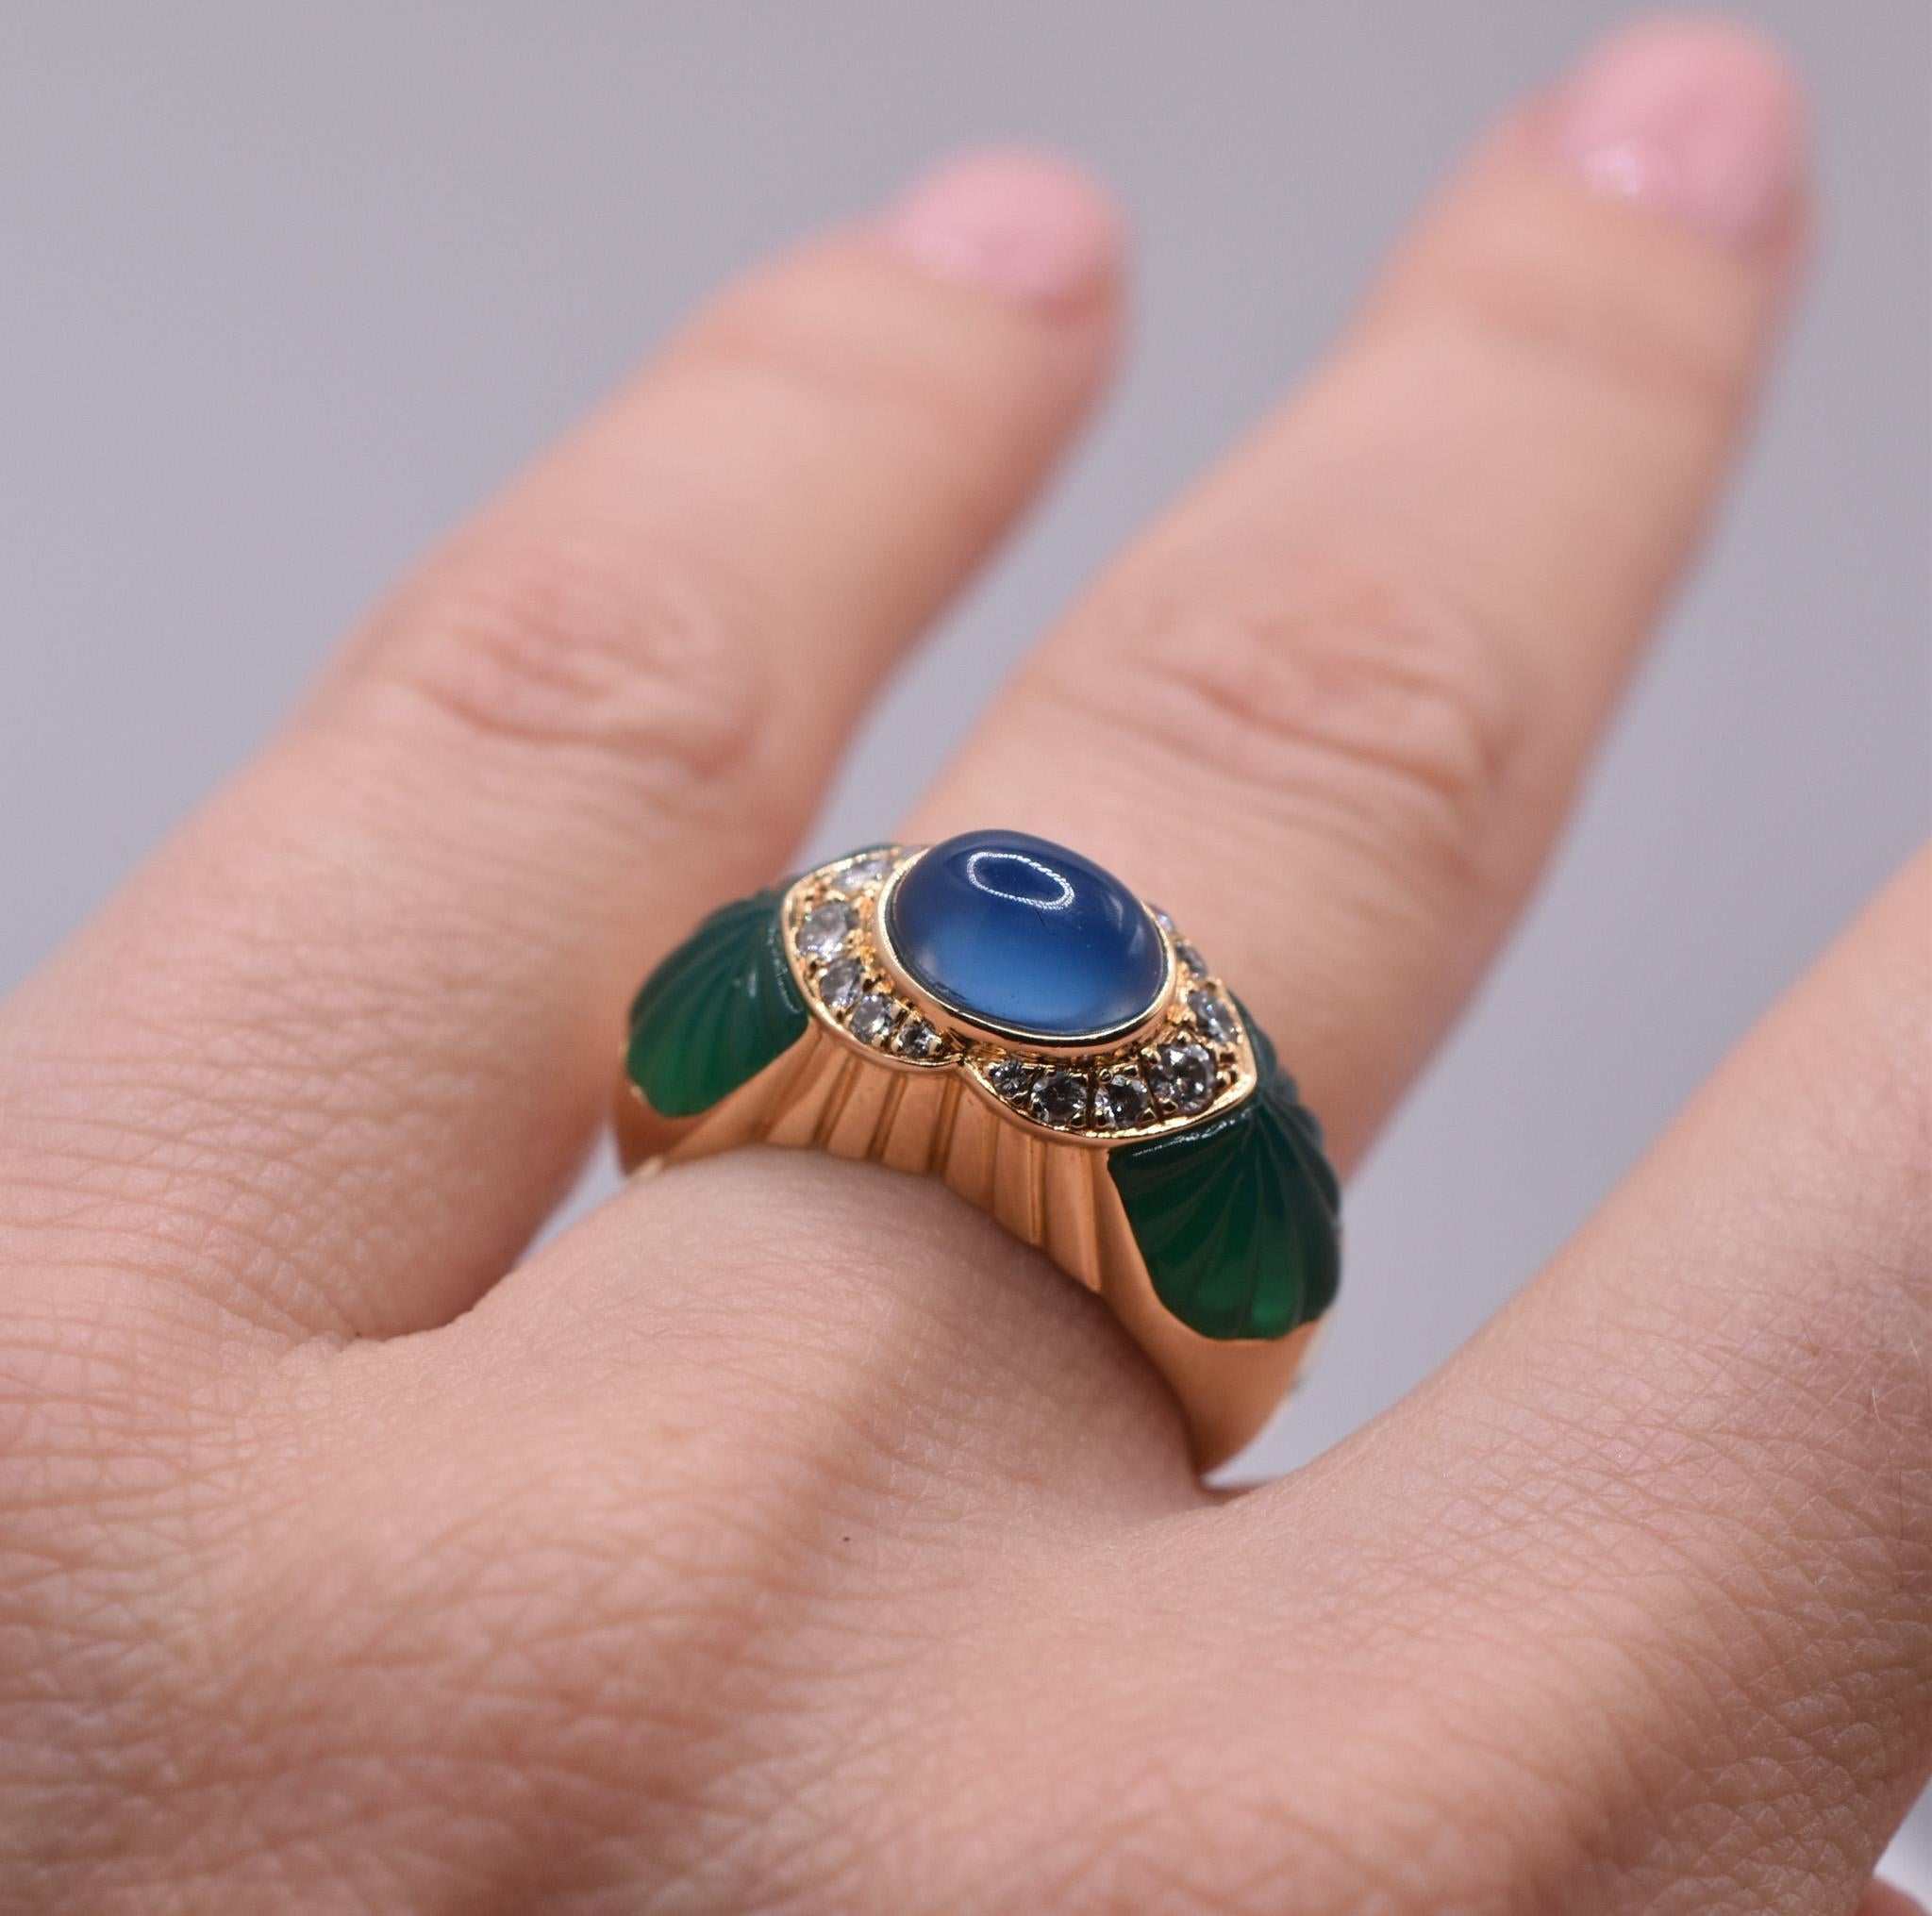 Cartier Sapphire and Chrysoprase ring in 18k Gold, showcasing a wonderful Natural Cabochon-cut Sapphire at the center with Carved Chrysoprase shoulders and further embellished Diamond accents.

Made in France, circa 1980.

We original documents from